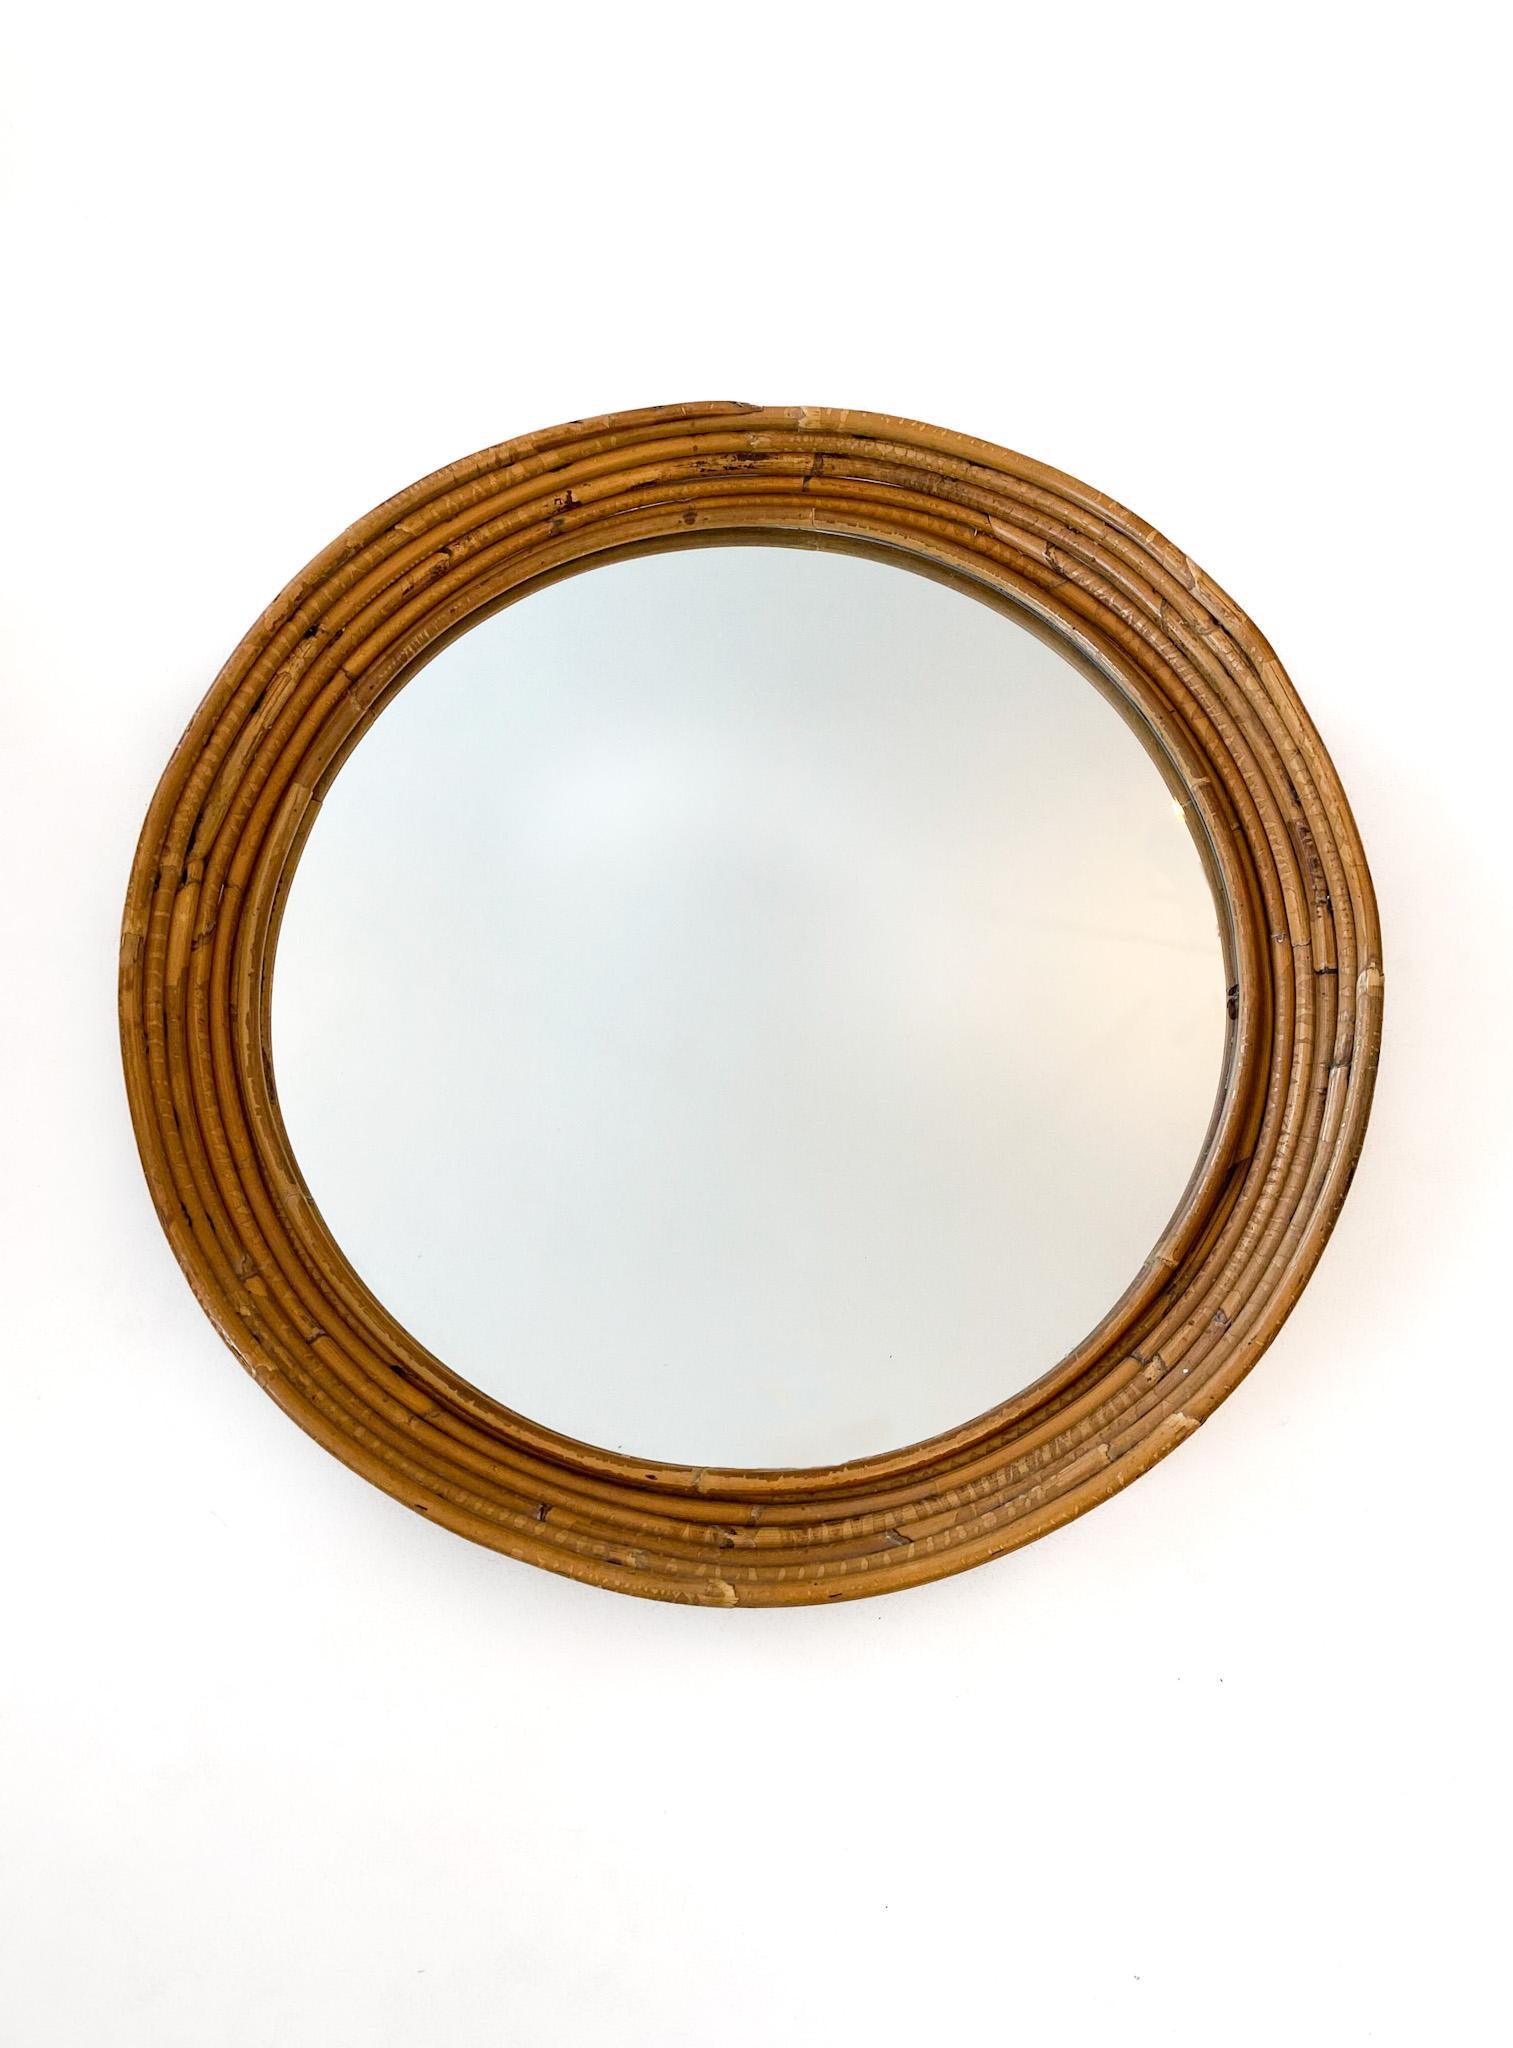 Hand-Crafted Mid-Century Modern Round Rattan Wall Mirror, Italy, 1970s For Sale